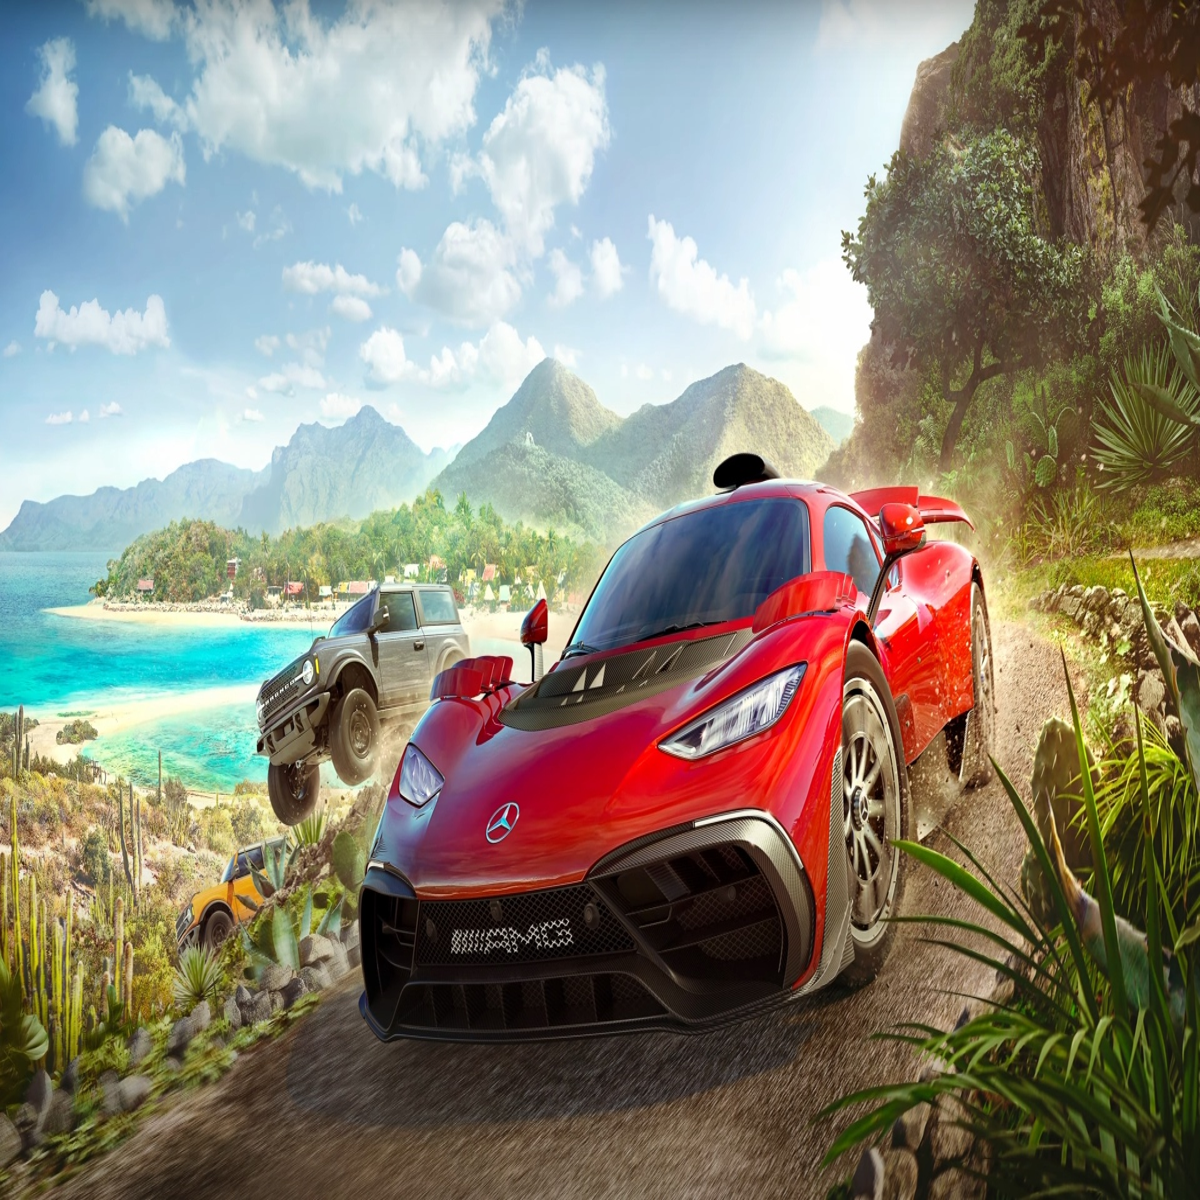 Forza 4 Horizon best deals, price and new features, London Evening  Standard